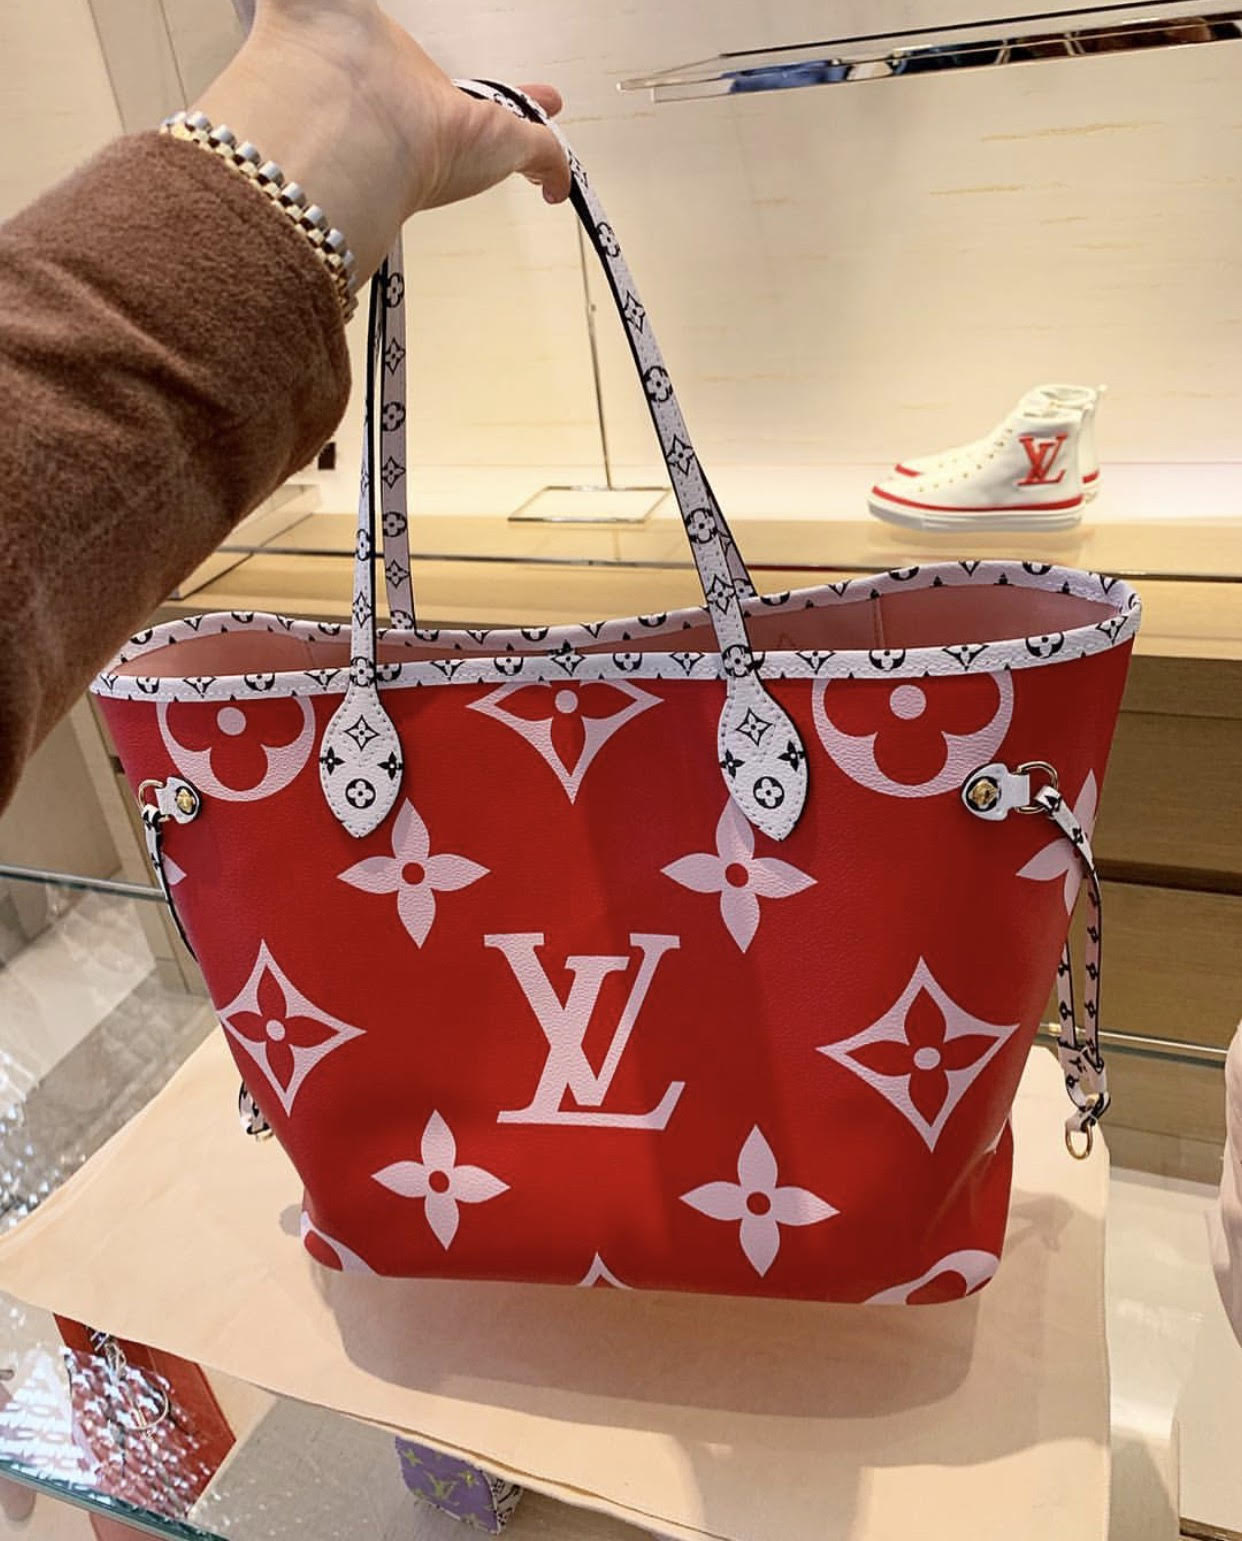 Louis Vuitton Love Lock Collection From Spring/Summer 2019 - Spotted Fashion